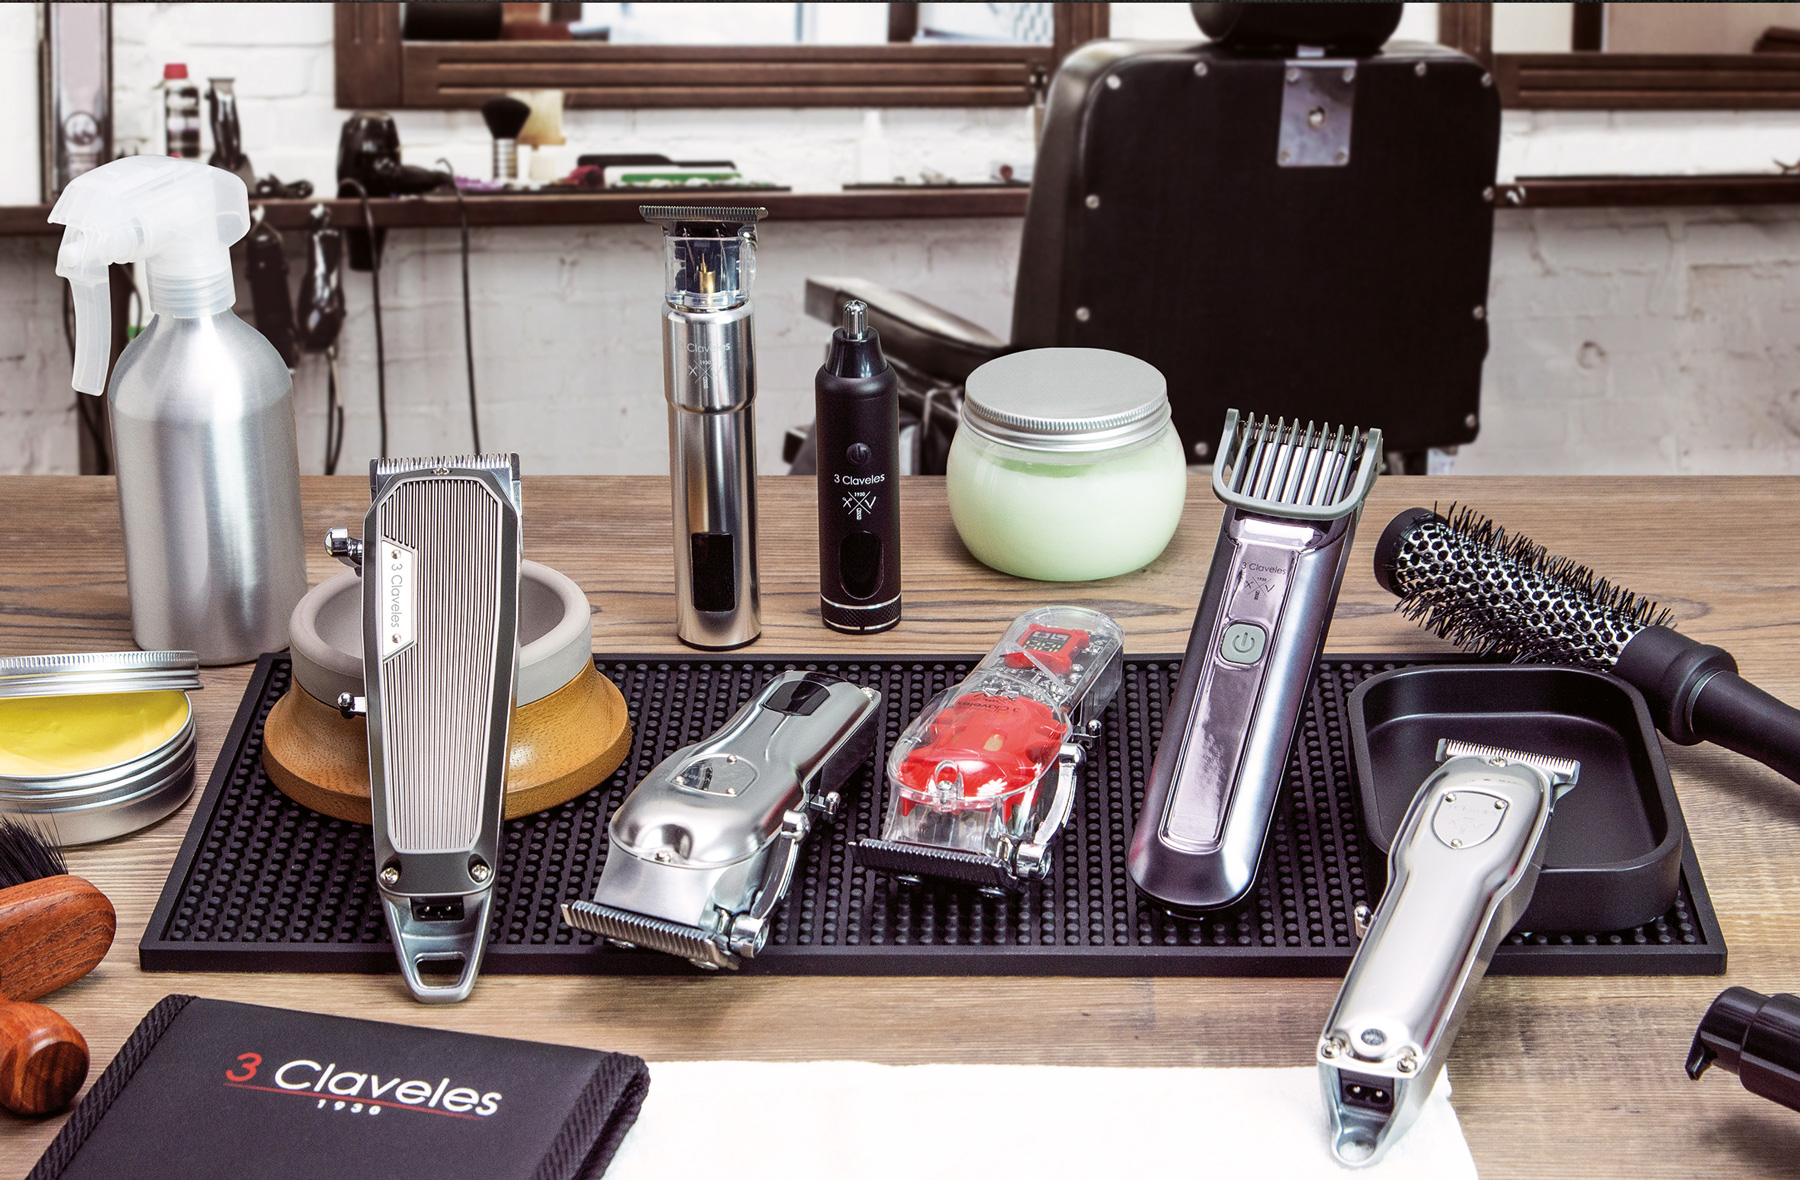 Hair clippers and trimmers 3 Claveles